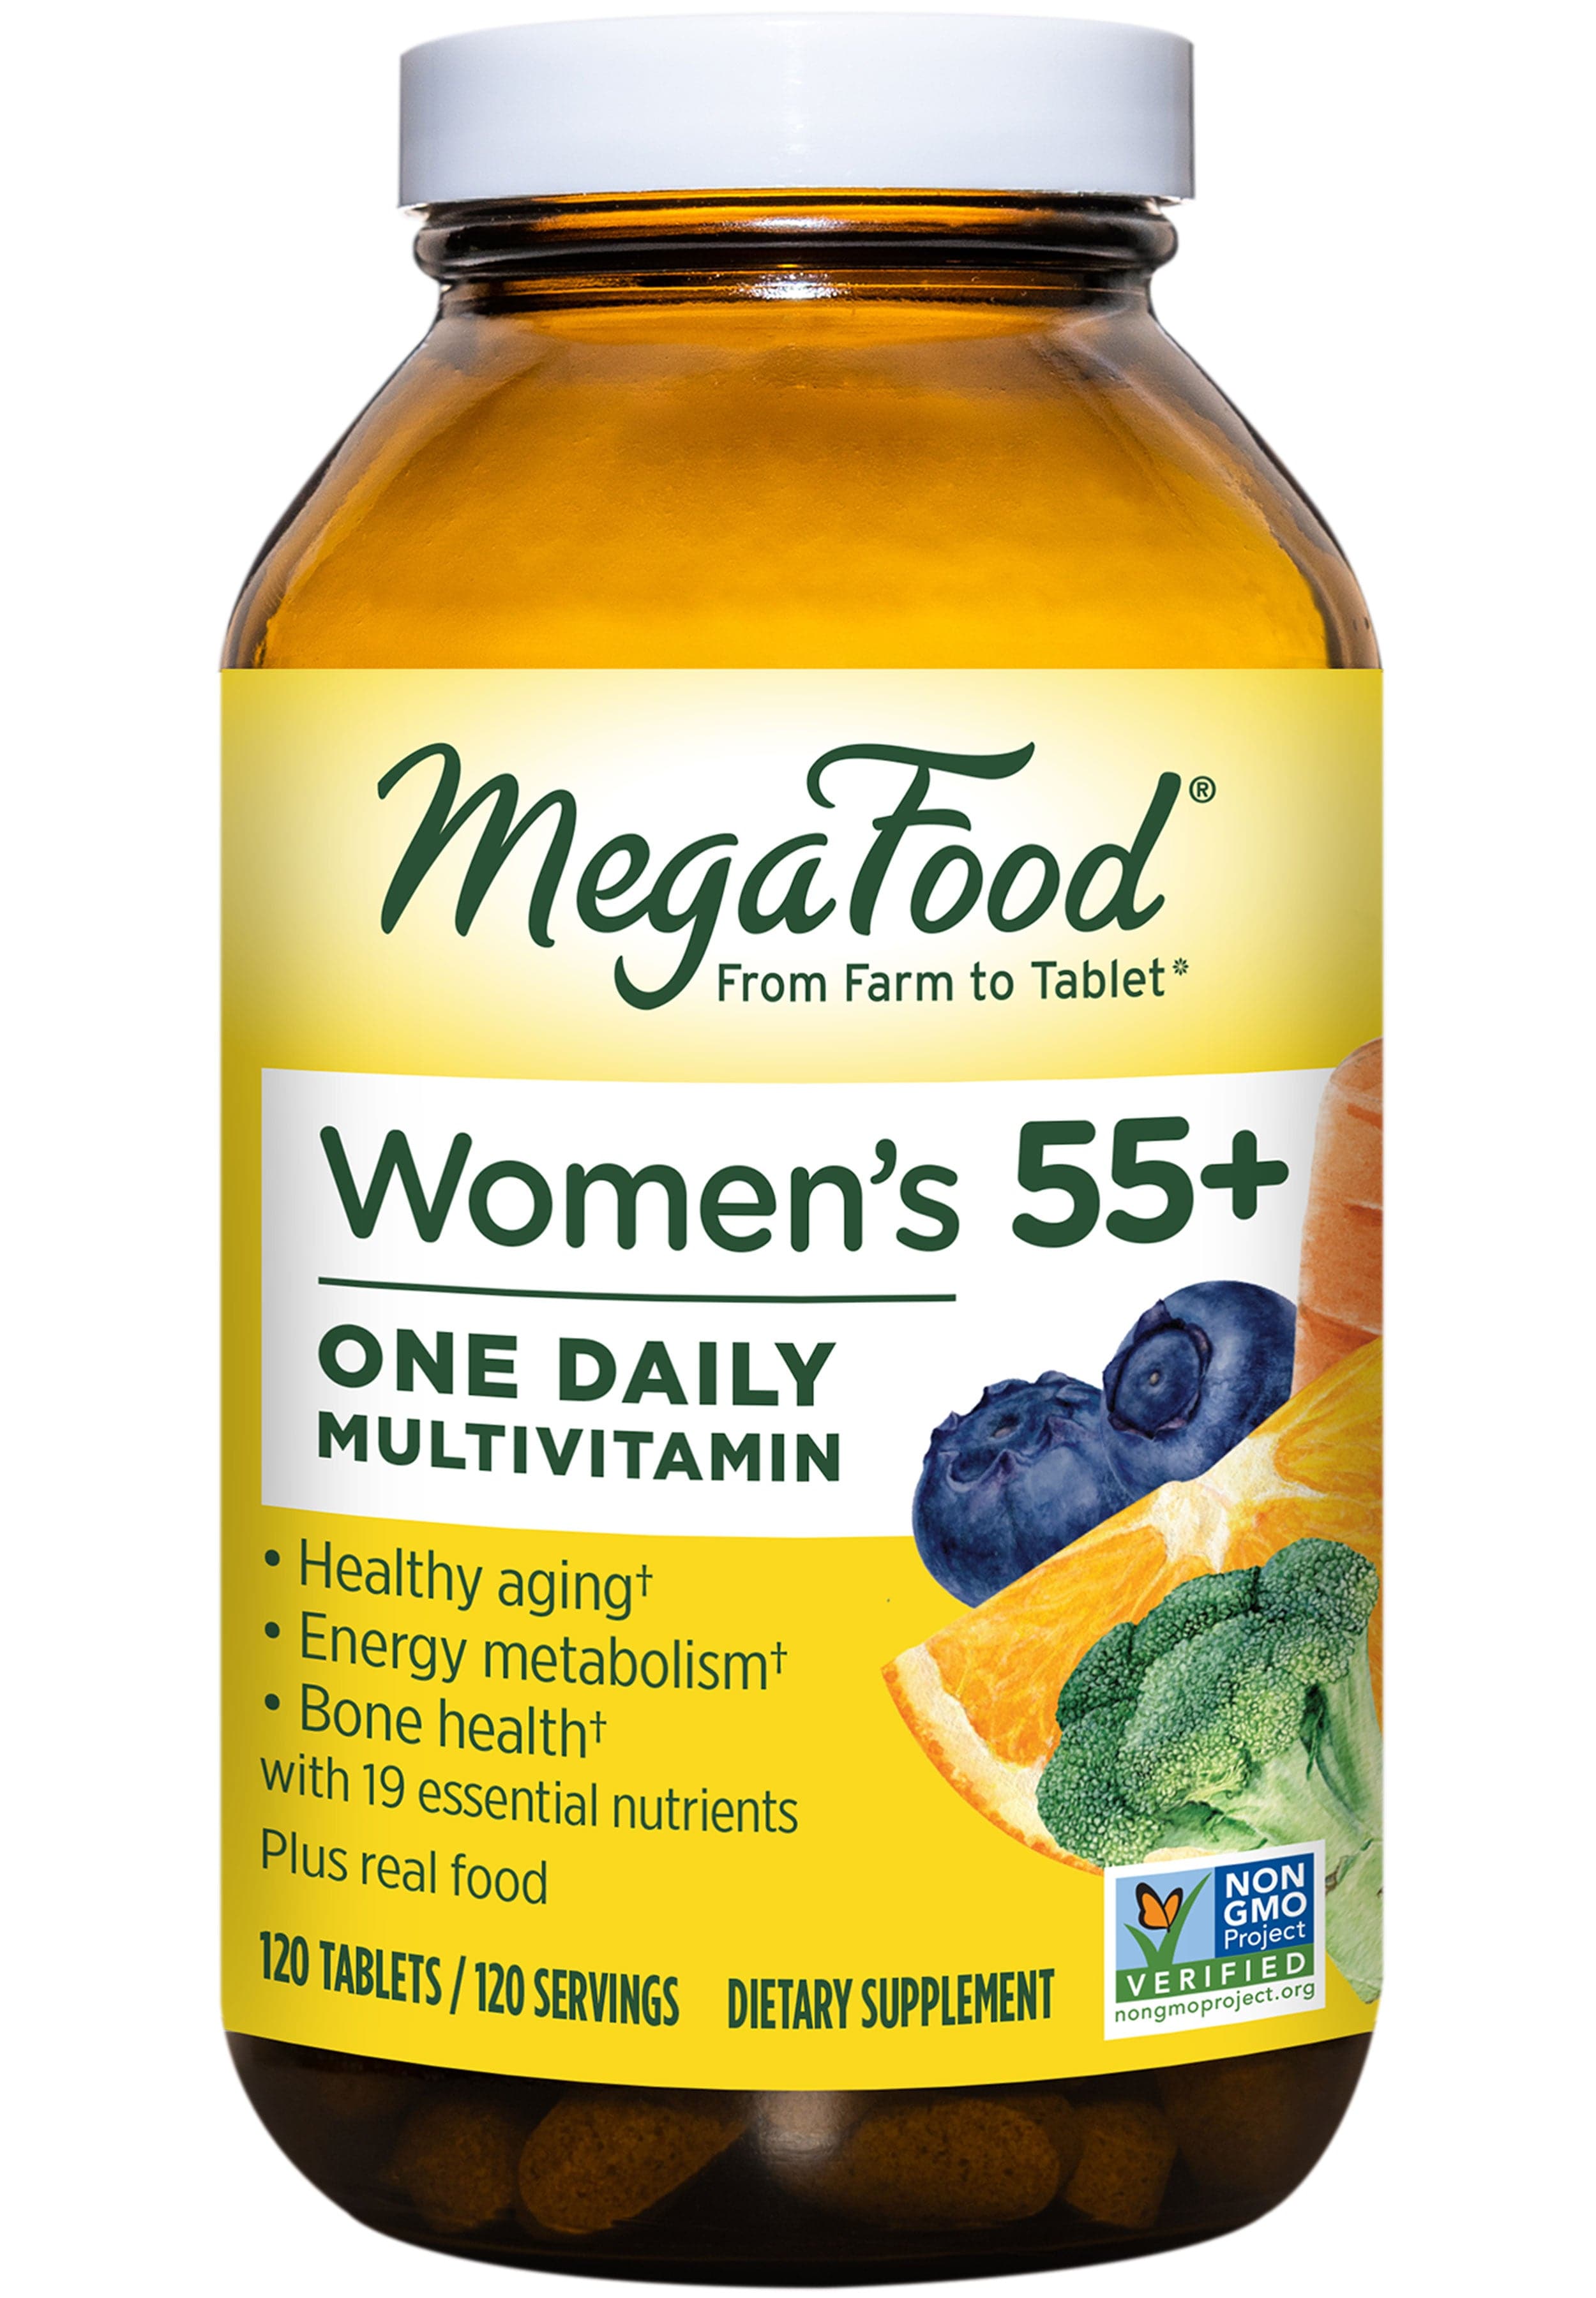 MegaFood Women's 55+ One Daily Multivitamin (Formerly Women Over 55 One Daily)